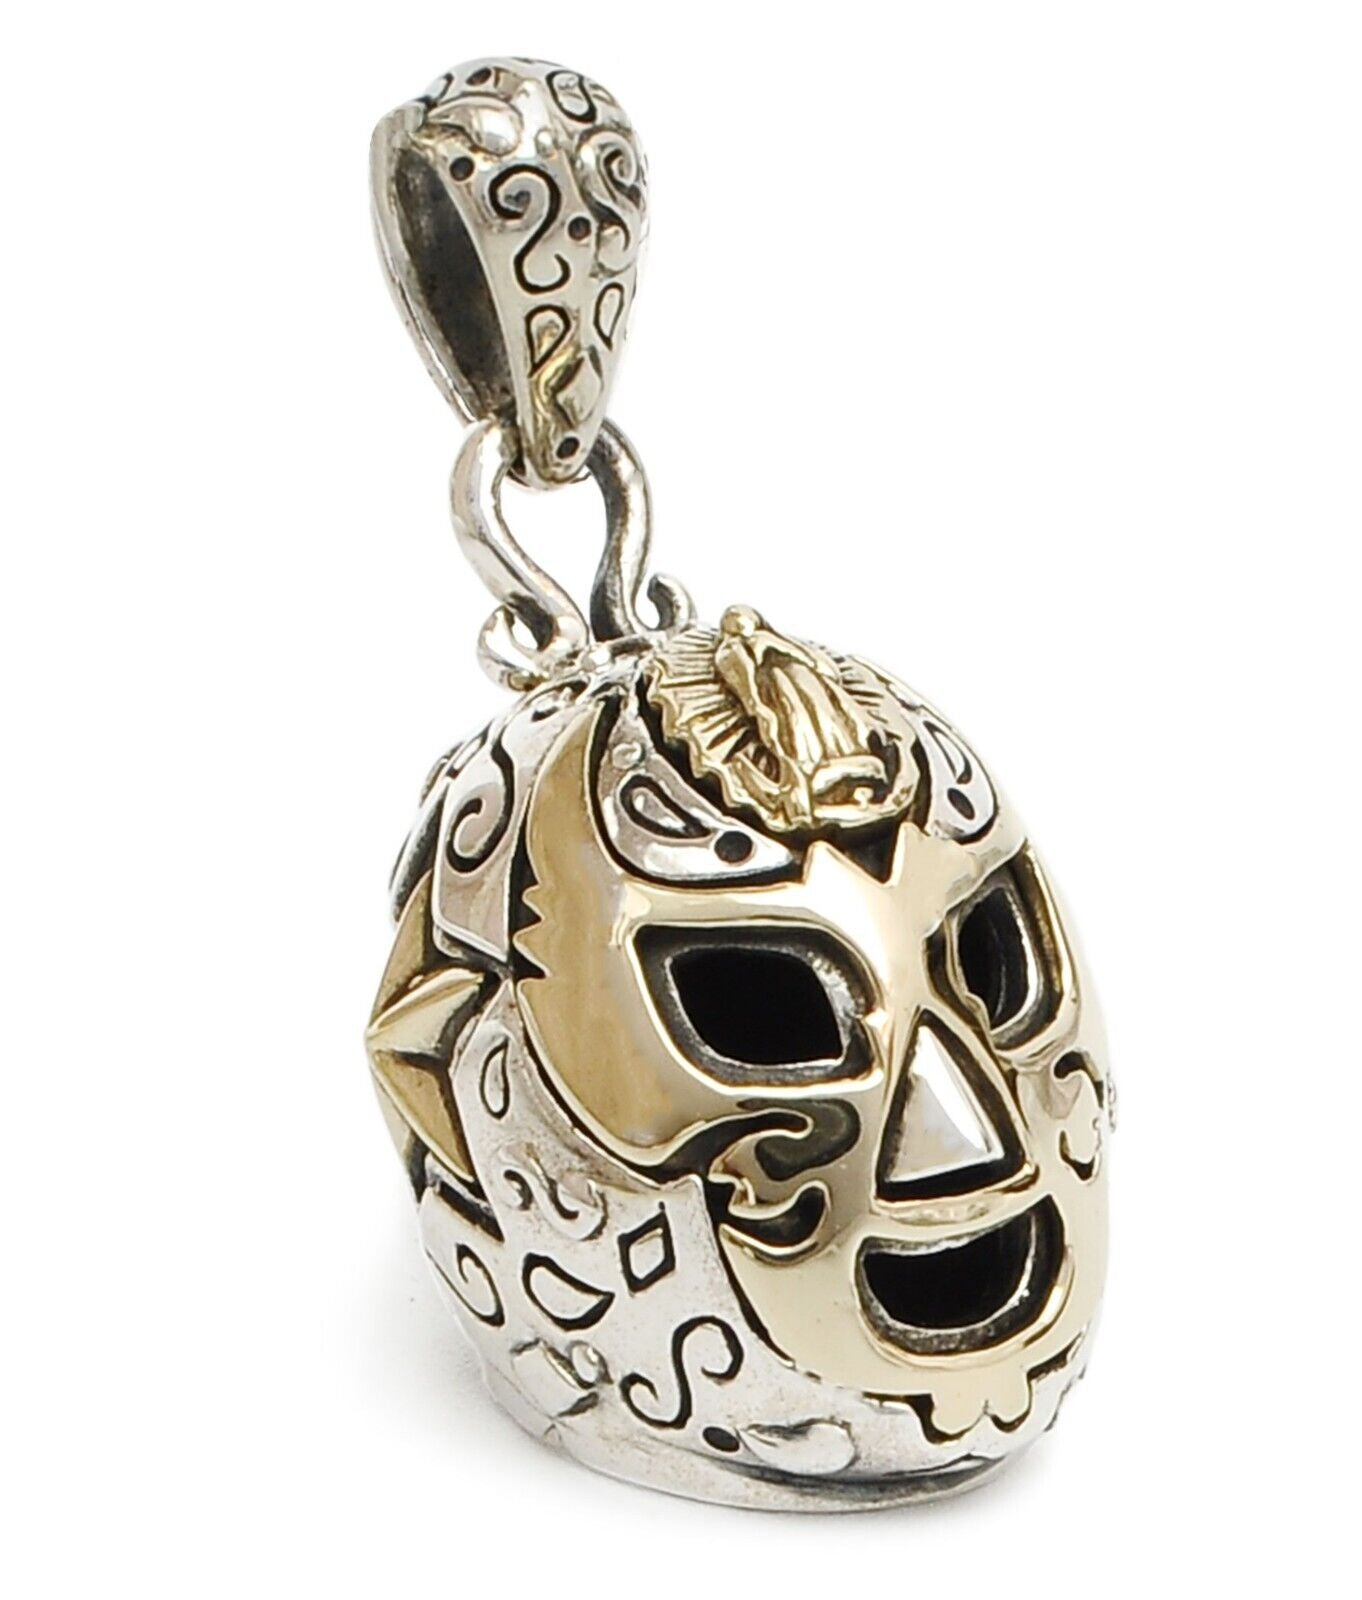 Wrestling Mask 925 Sterling Silver Pendant Necklace Jewelry